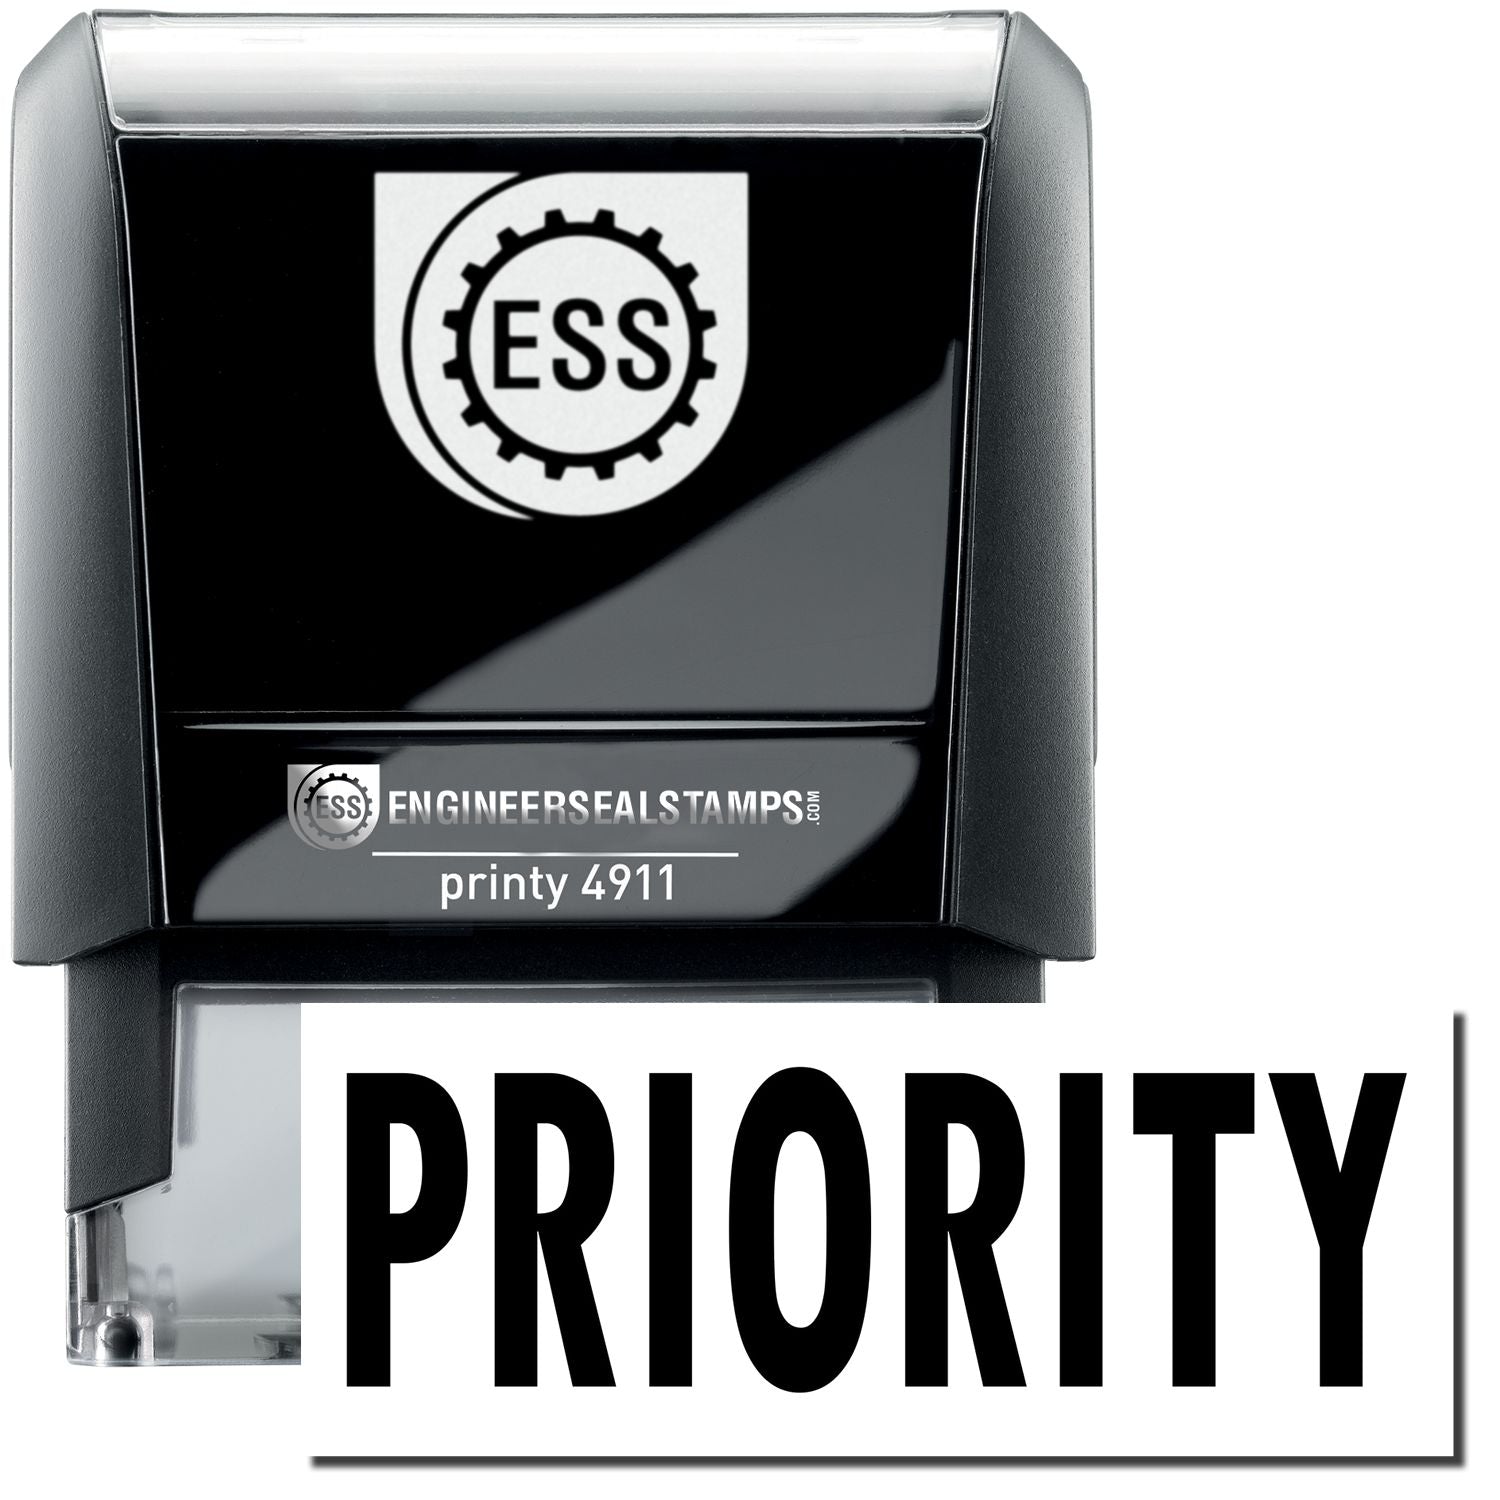 A self-inking stamp with a stamped image showing how the text "PRIORITY" is displayed after stamping.